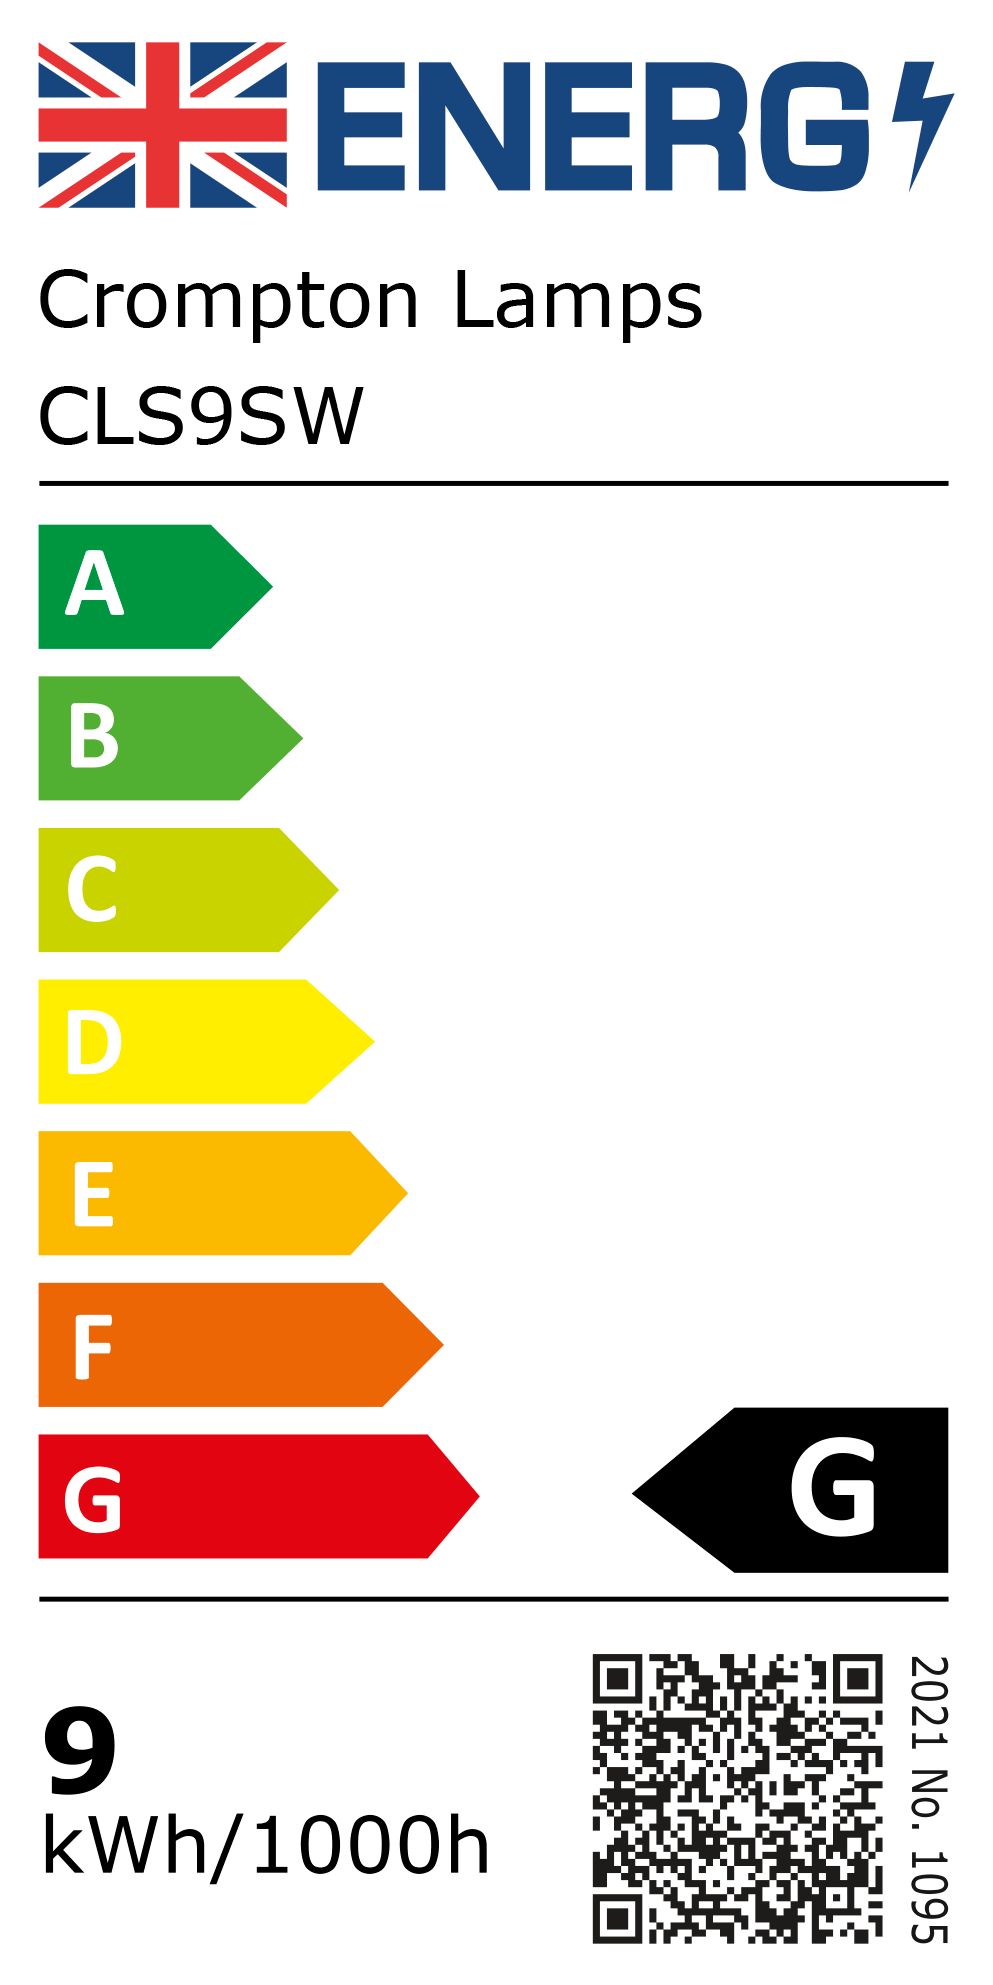 New 2021 Energy Rating Label: MPN CLS9SW